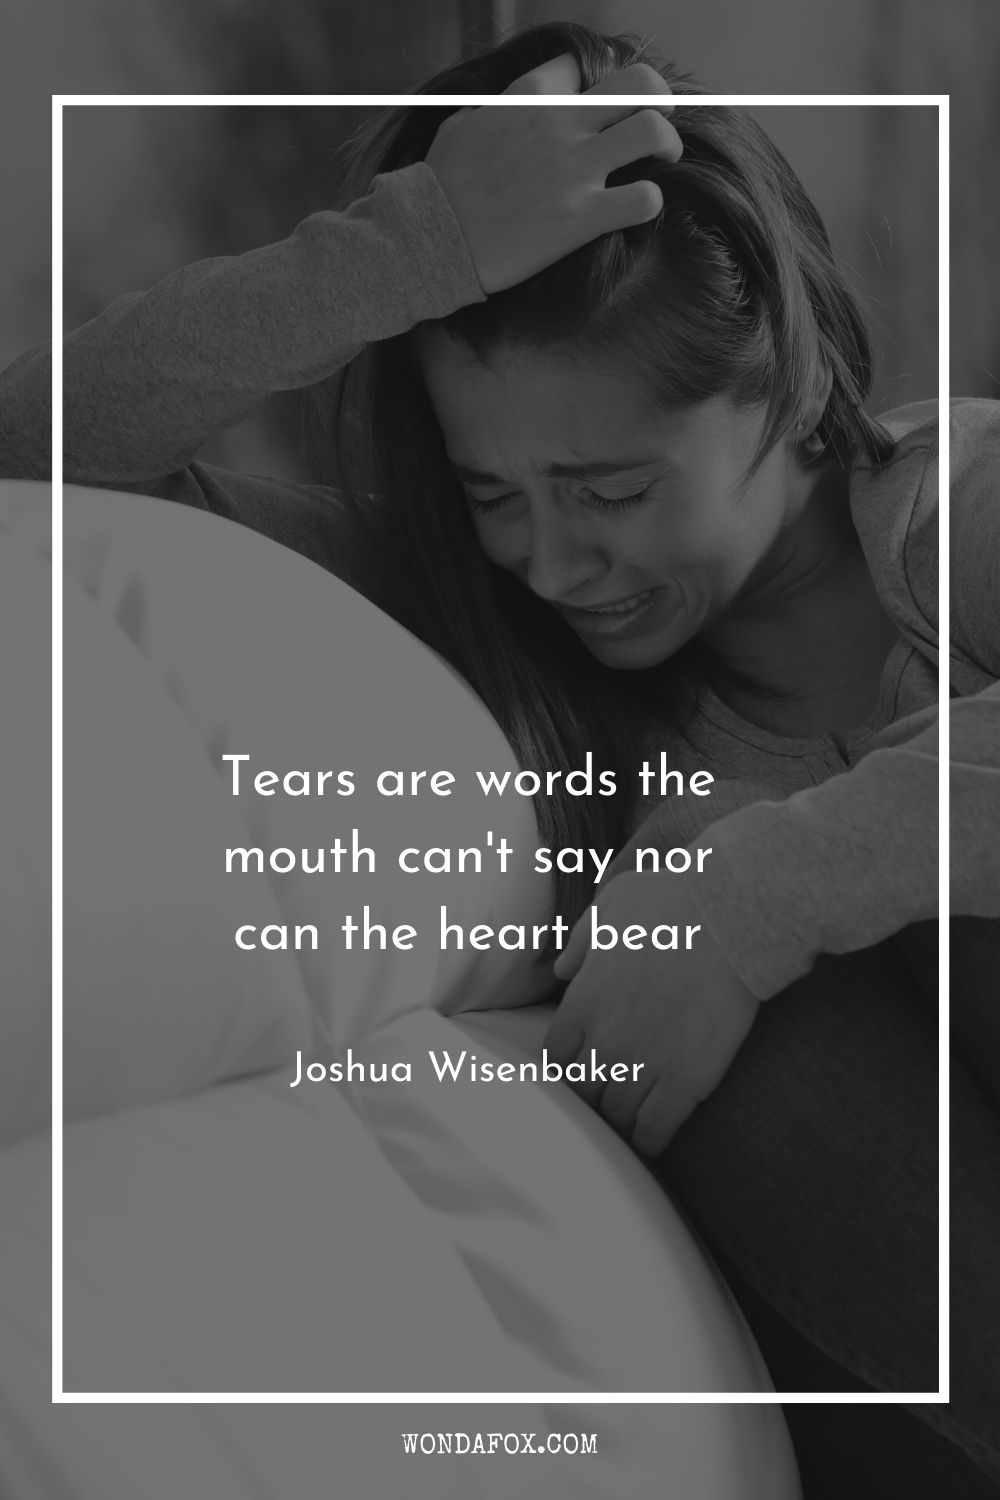 Tears are words the mouth can't say nor can the heart bear